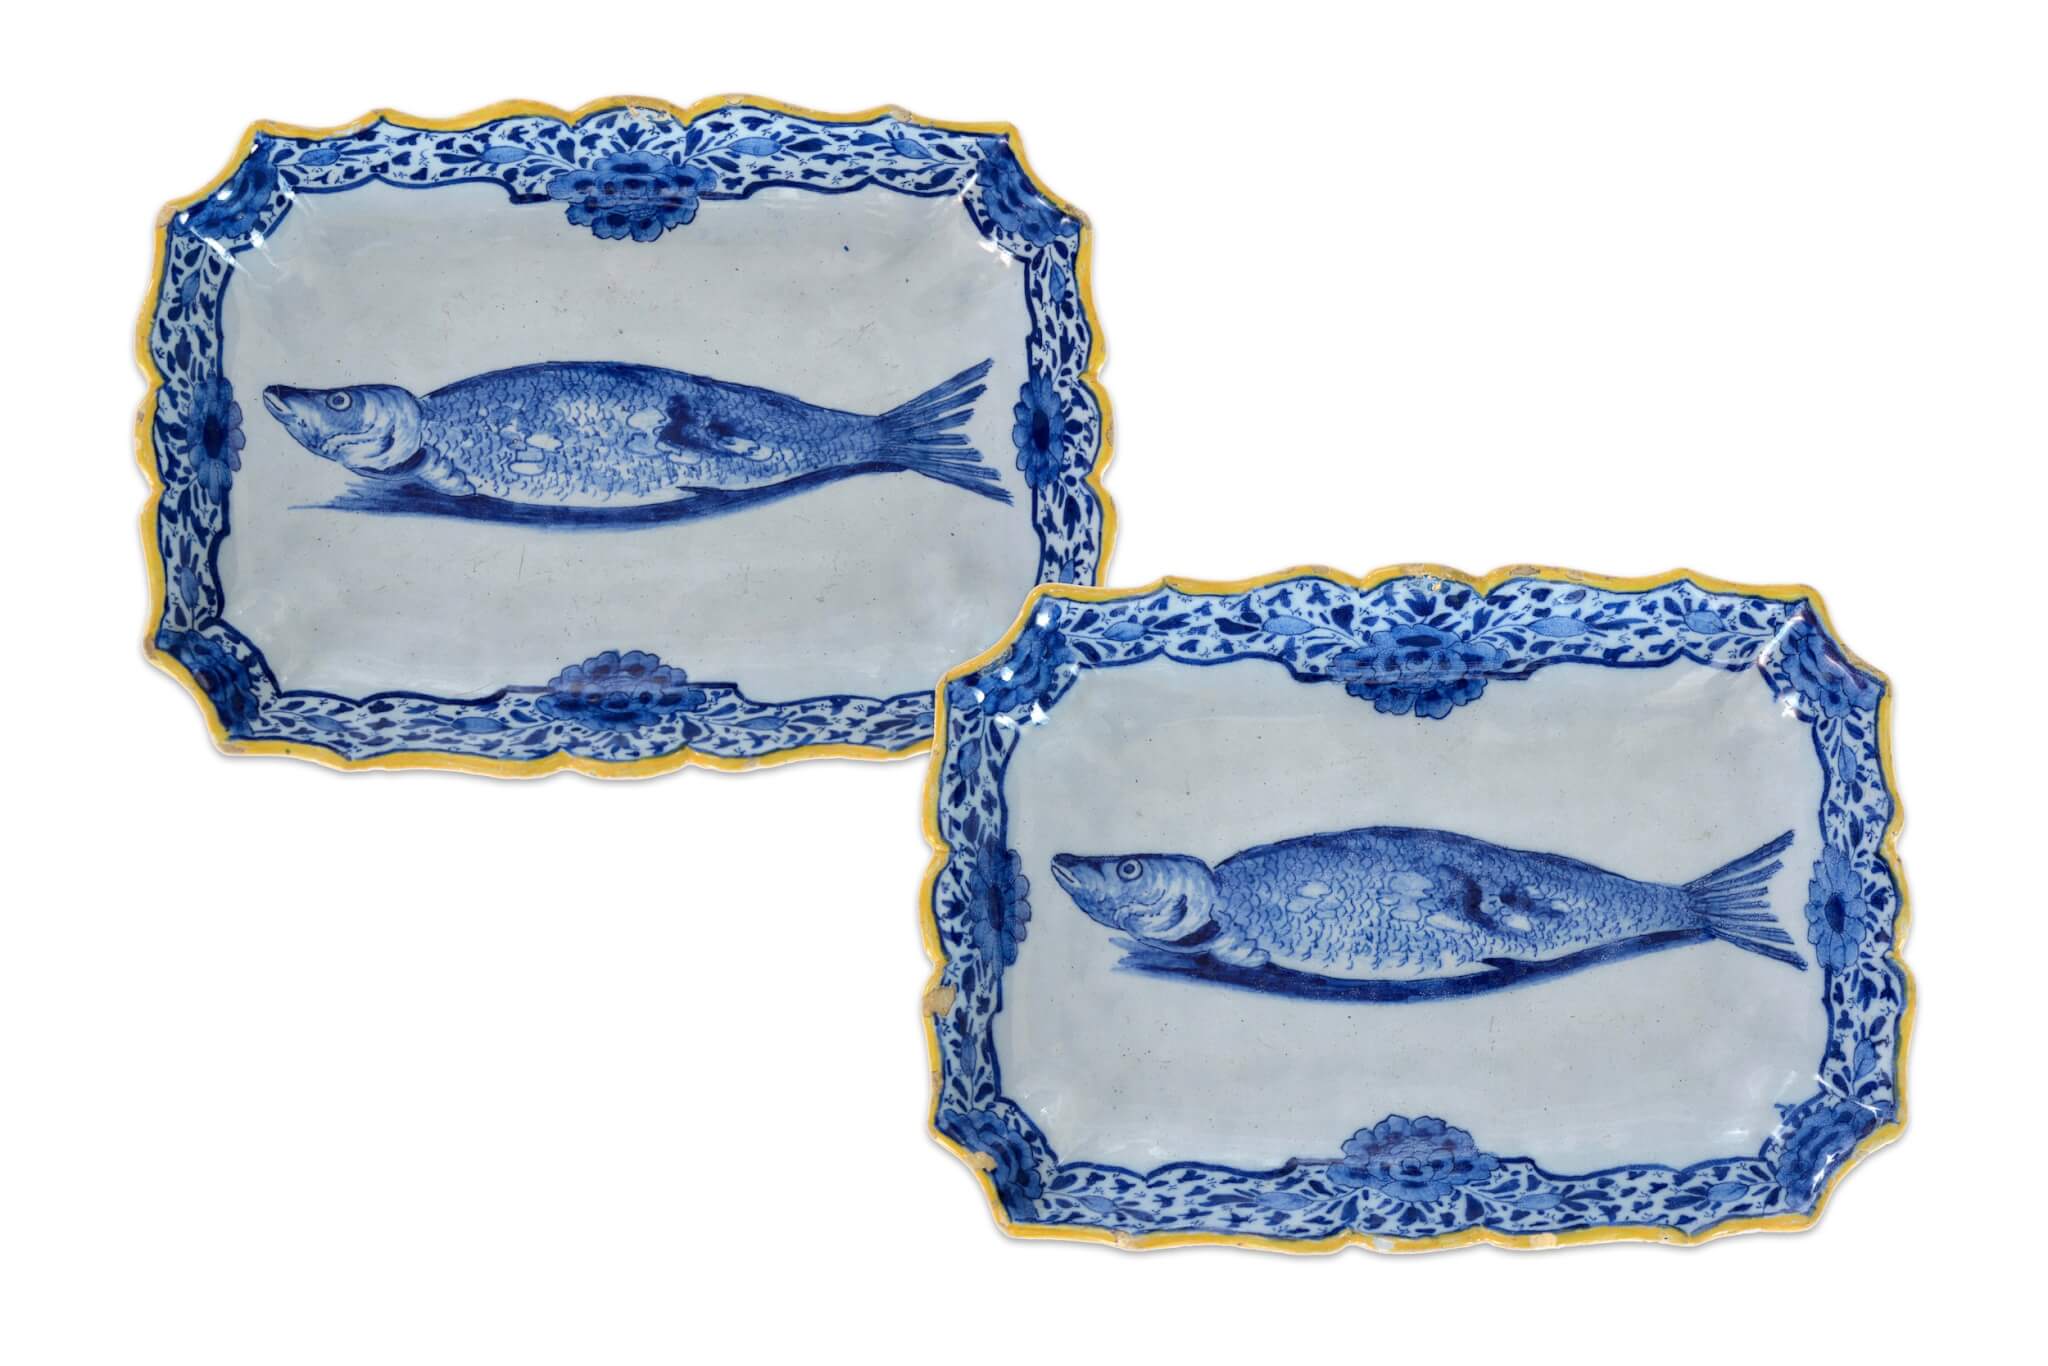 antique polychrome herring dishes